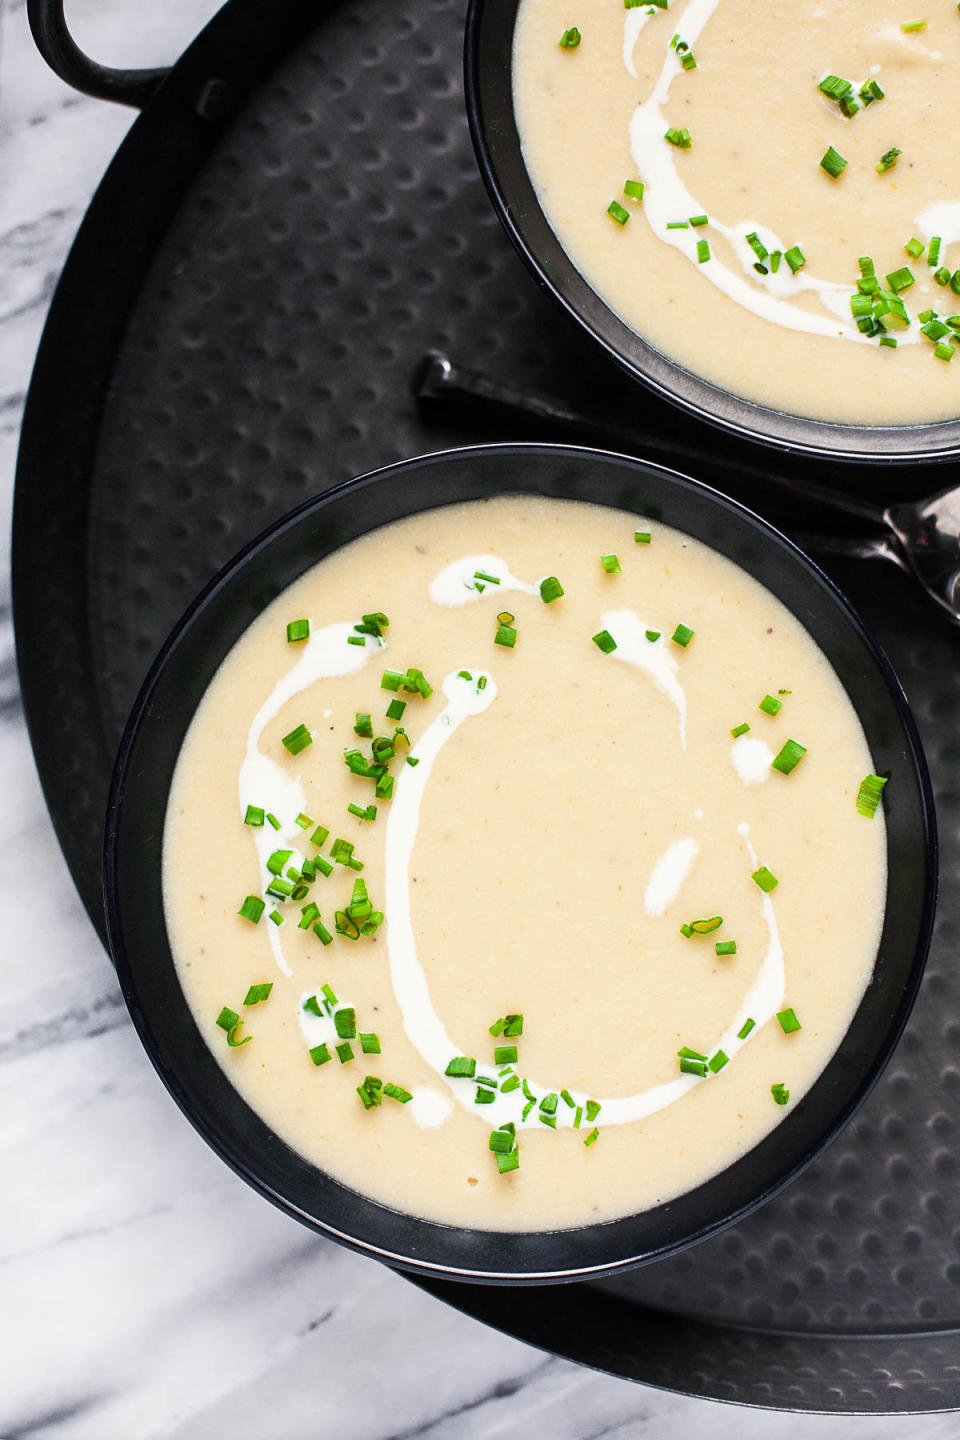 <strong>Get the <a href="http://acalculatedwhisk.com/instant-pot-potato-leek-soup/" target="_blank" rel="noopener noreferrer">Instant Pot Potato Leek Soup with Cauliflower</a> recipe from A Calculated Whisk.</strong>